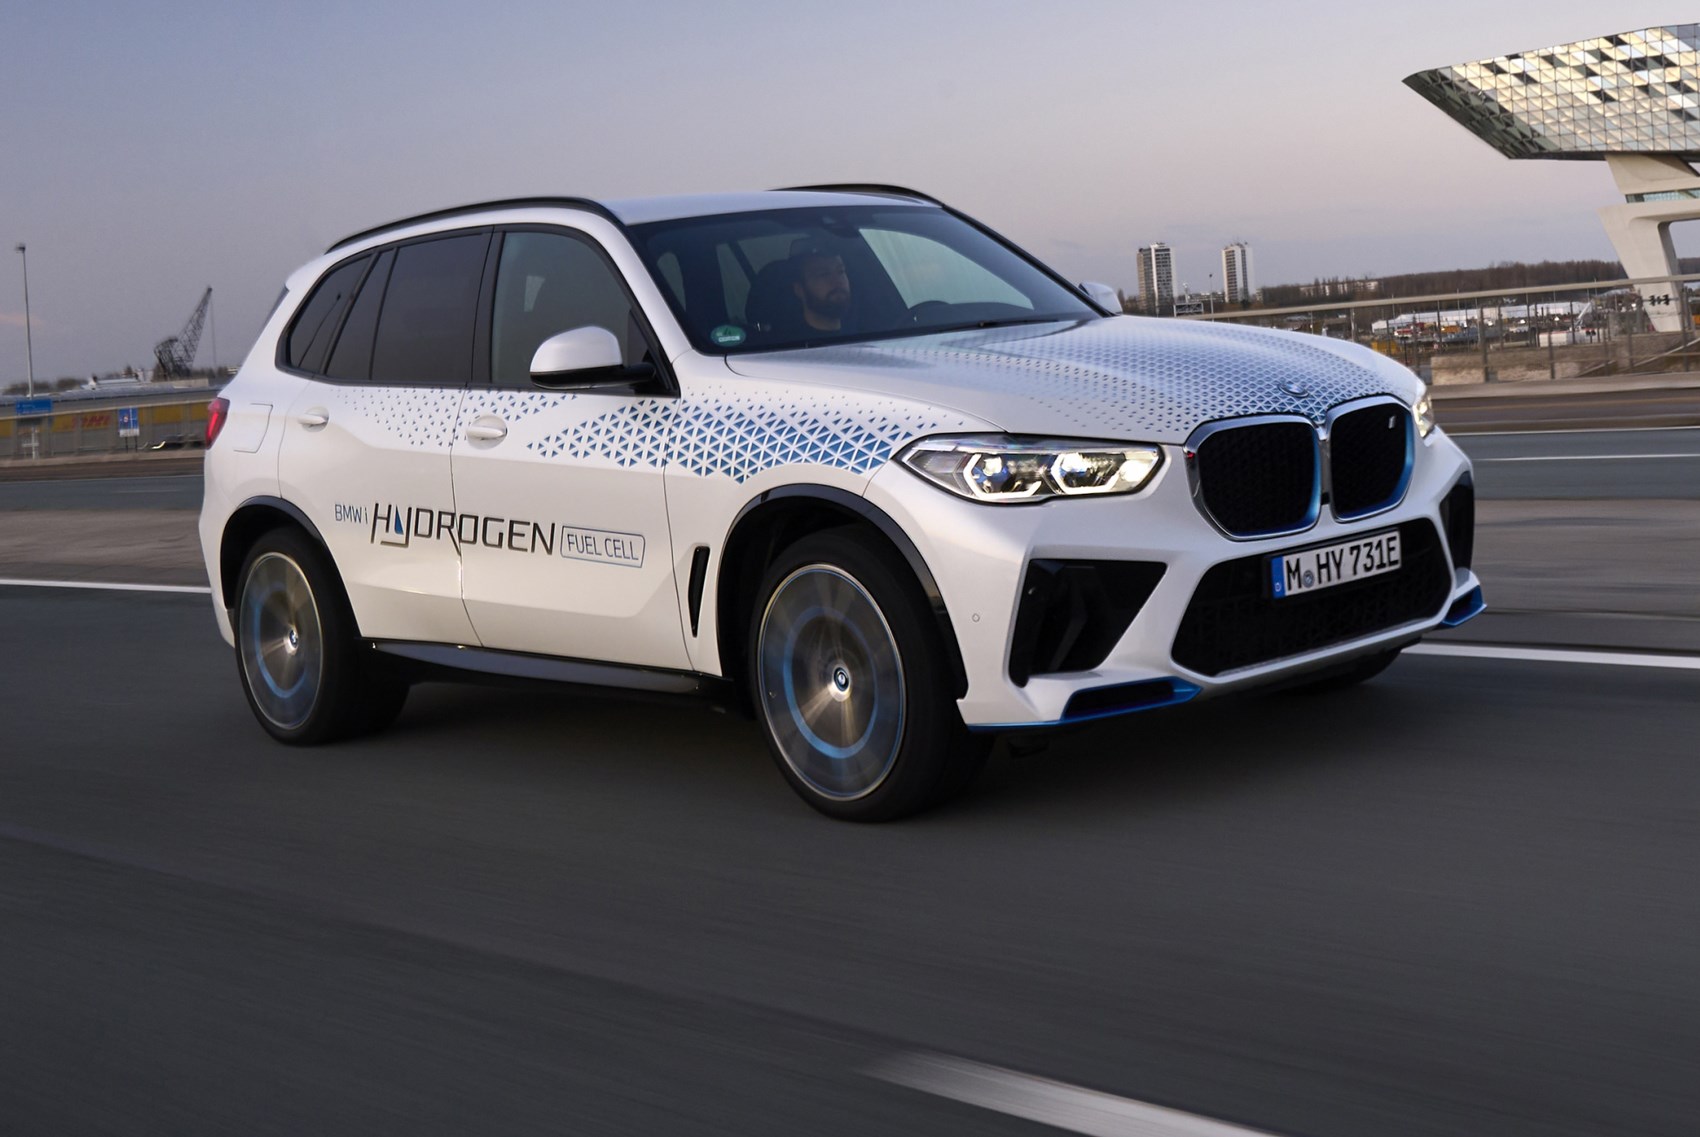 BMW X5 to get fuel cell version in 2022